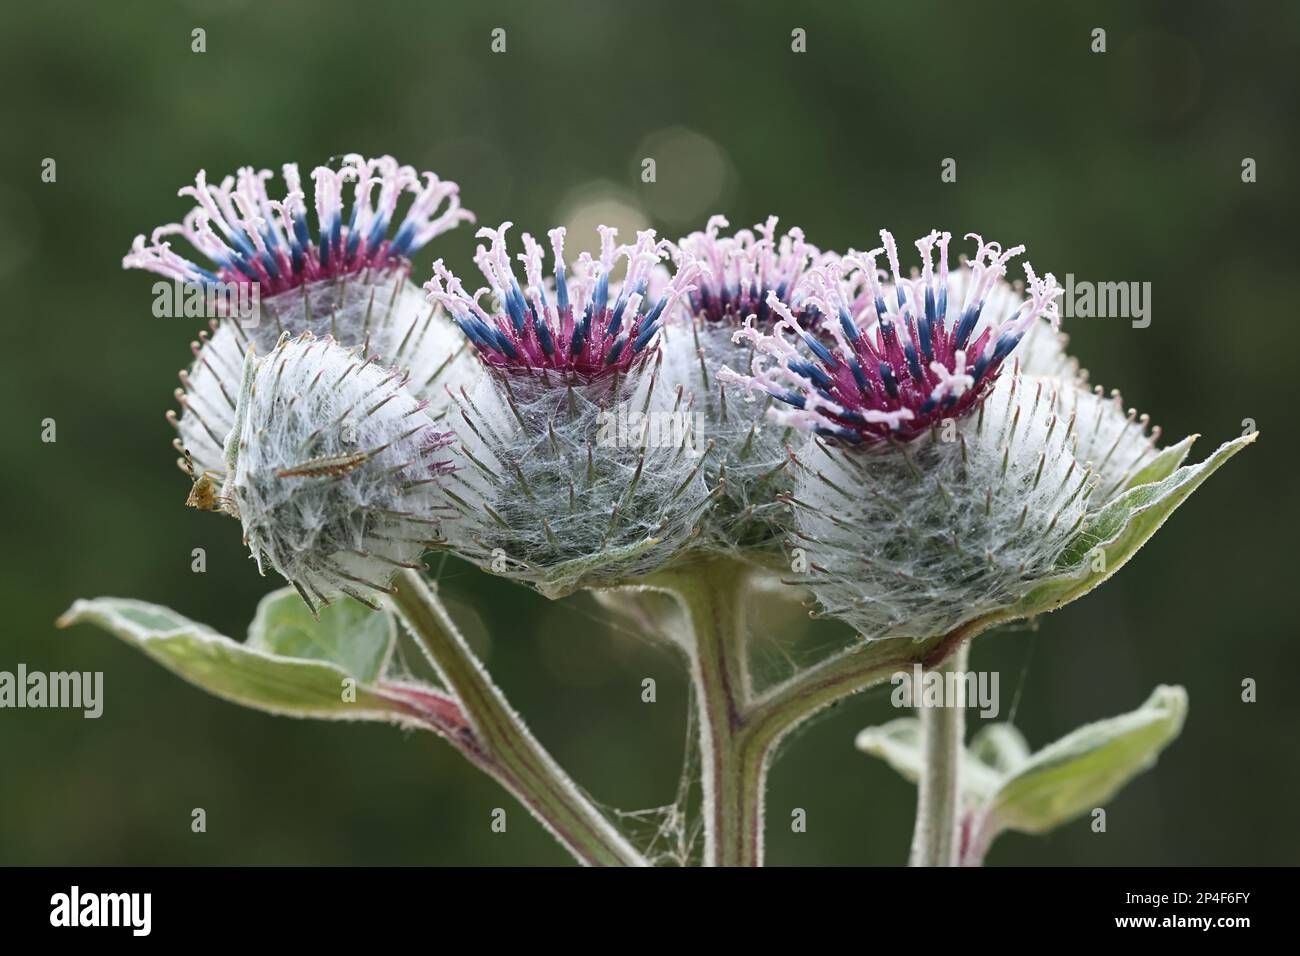 Arctium tomentosum, commonly known as the woolly burdock or downy burdock, wild plant from Finland Stock Photo